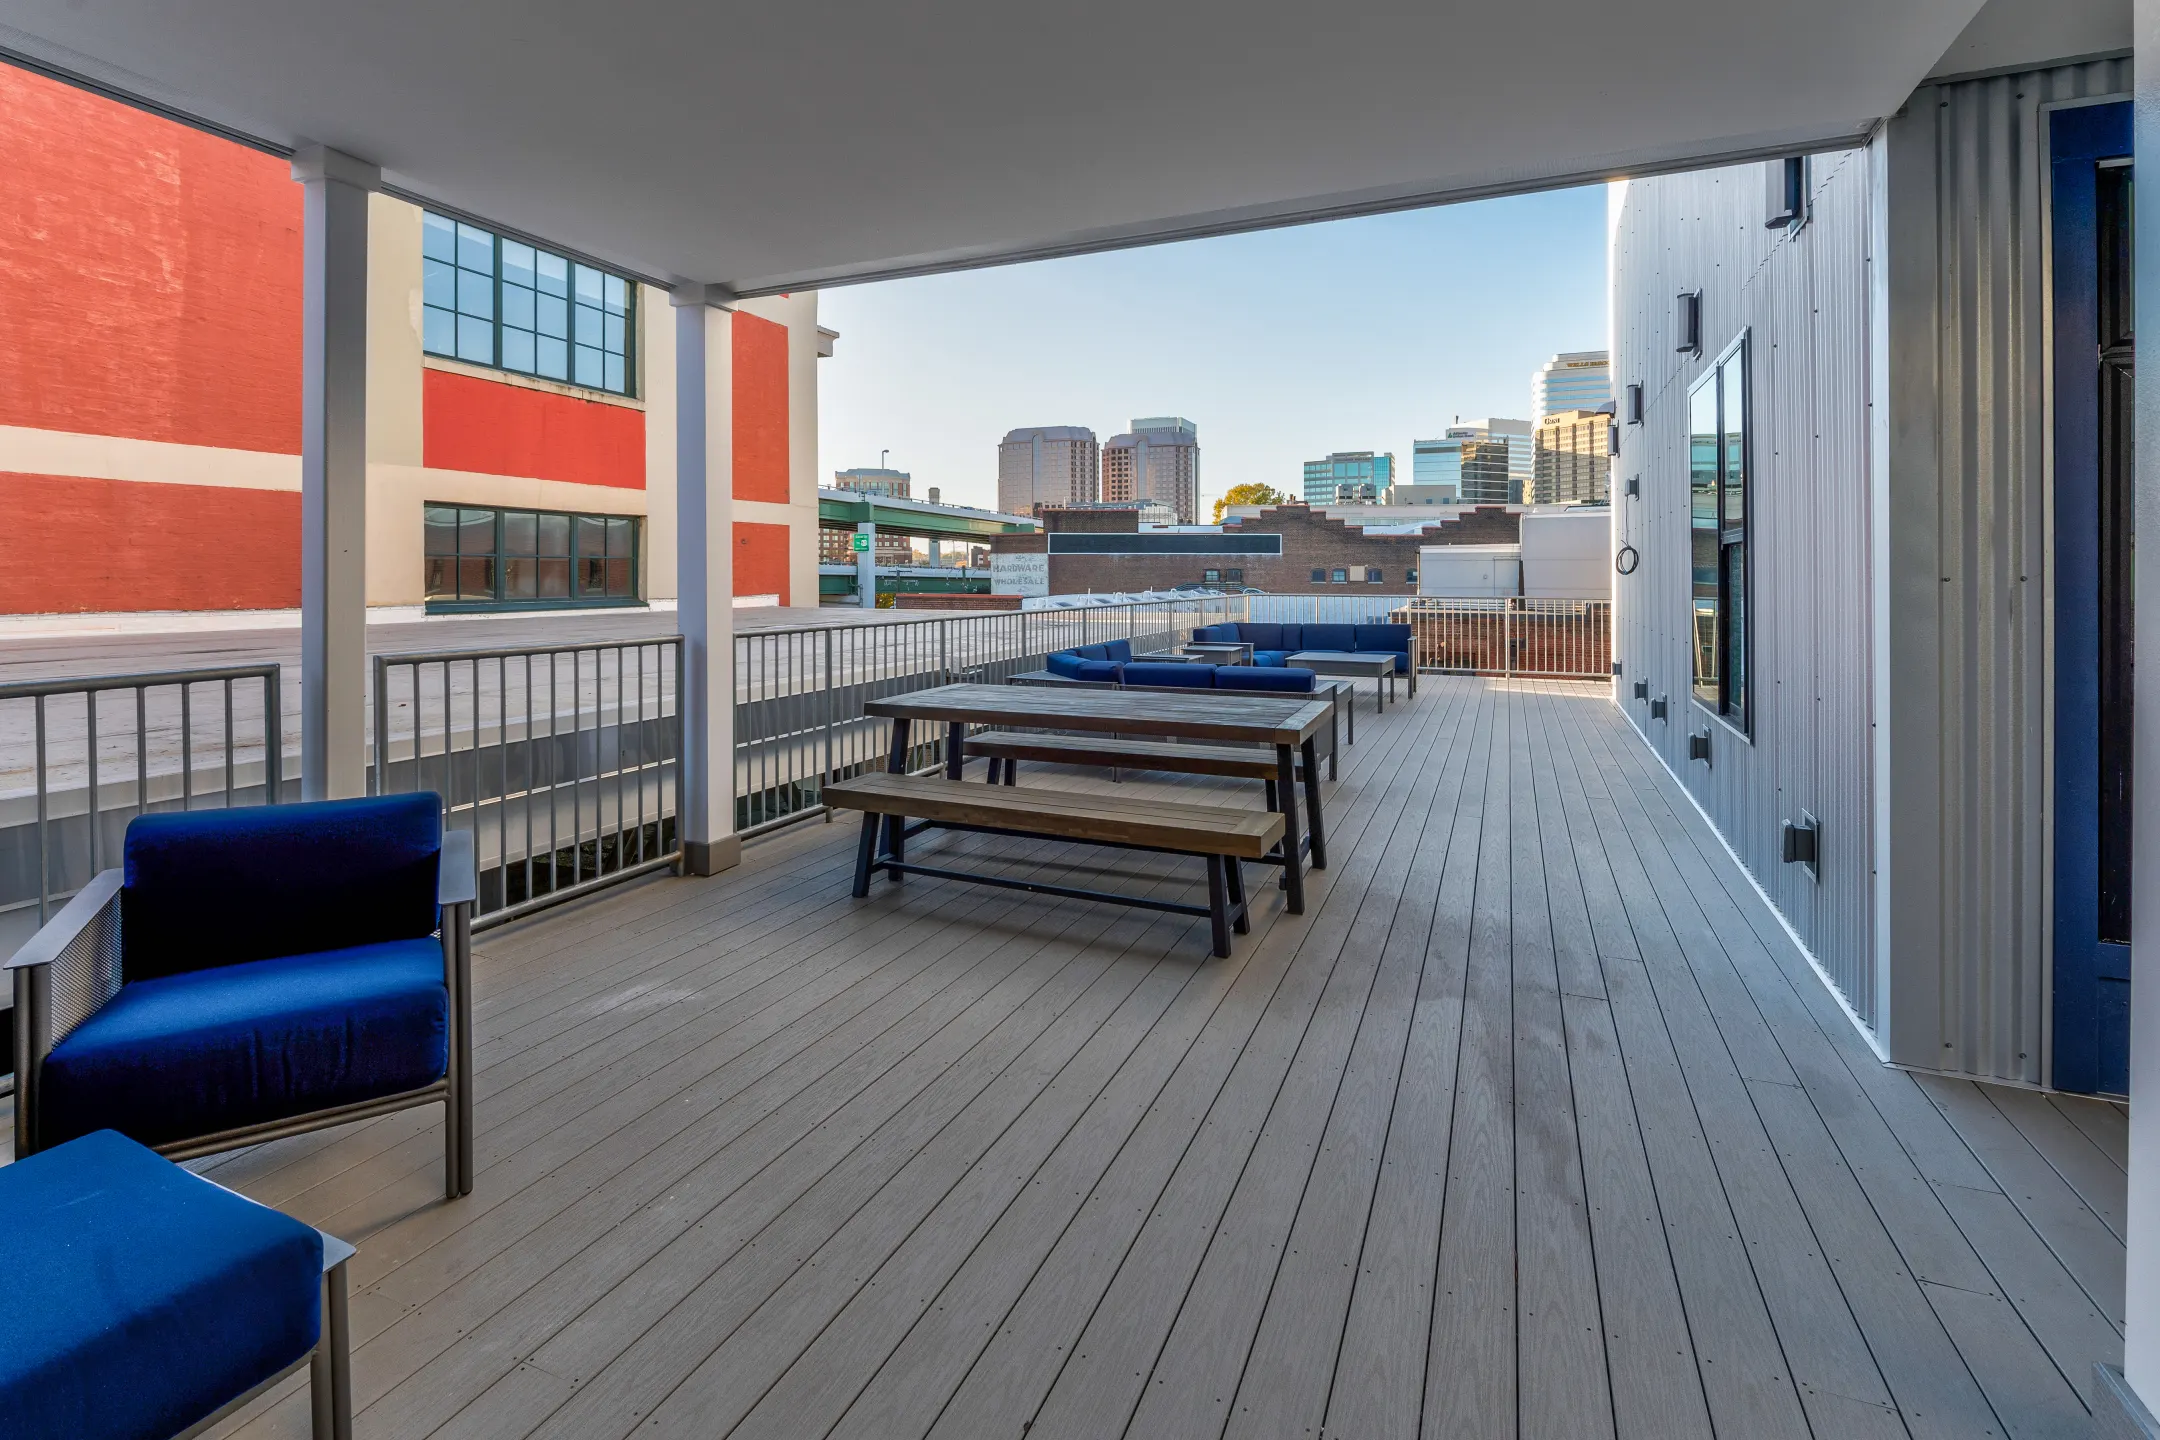 Patio / Deck - The Flats at Canal Crossing - Richmond, VA